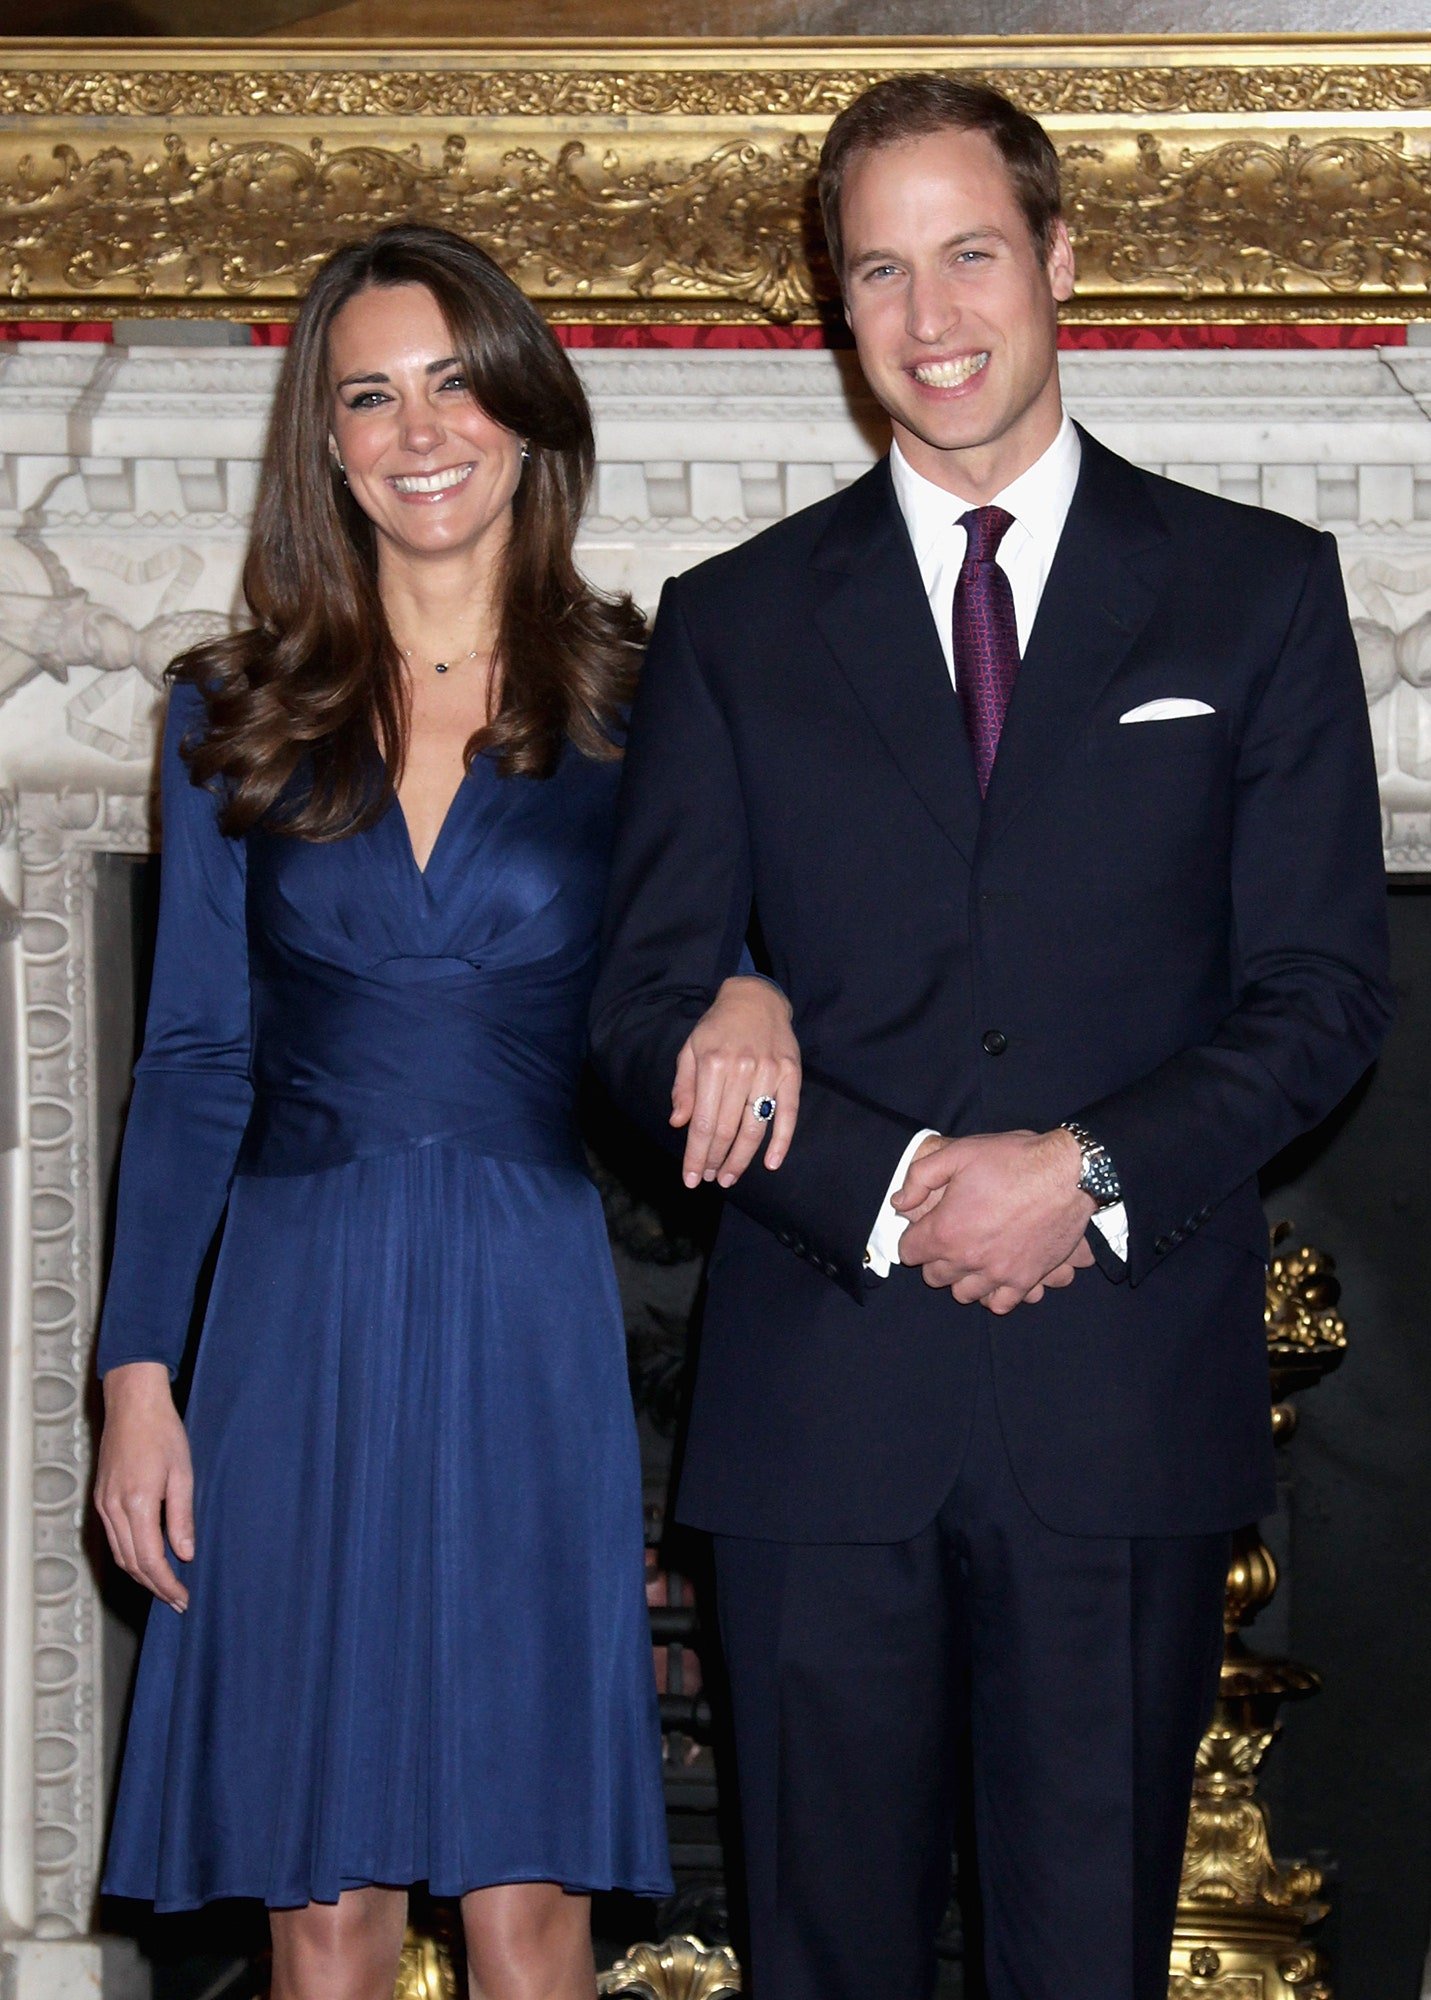 Kate Middleton and Prince William pose for photos after confirming their engagement on November 16, 2010 | Source: Getty Images